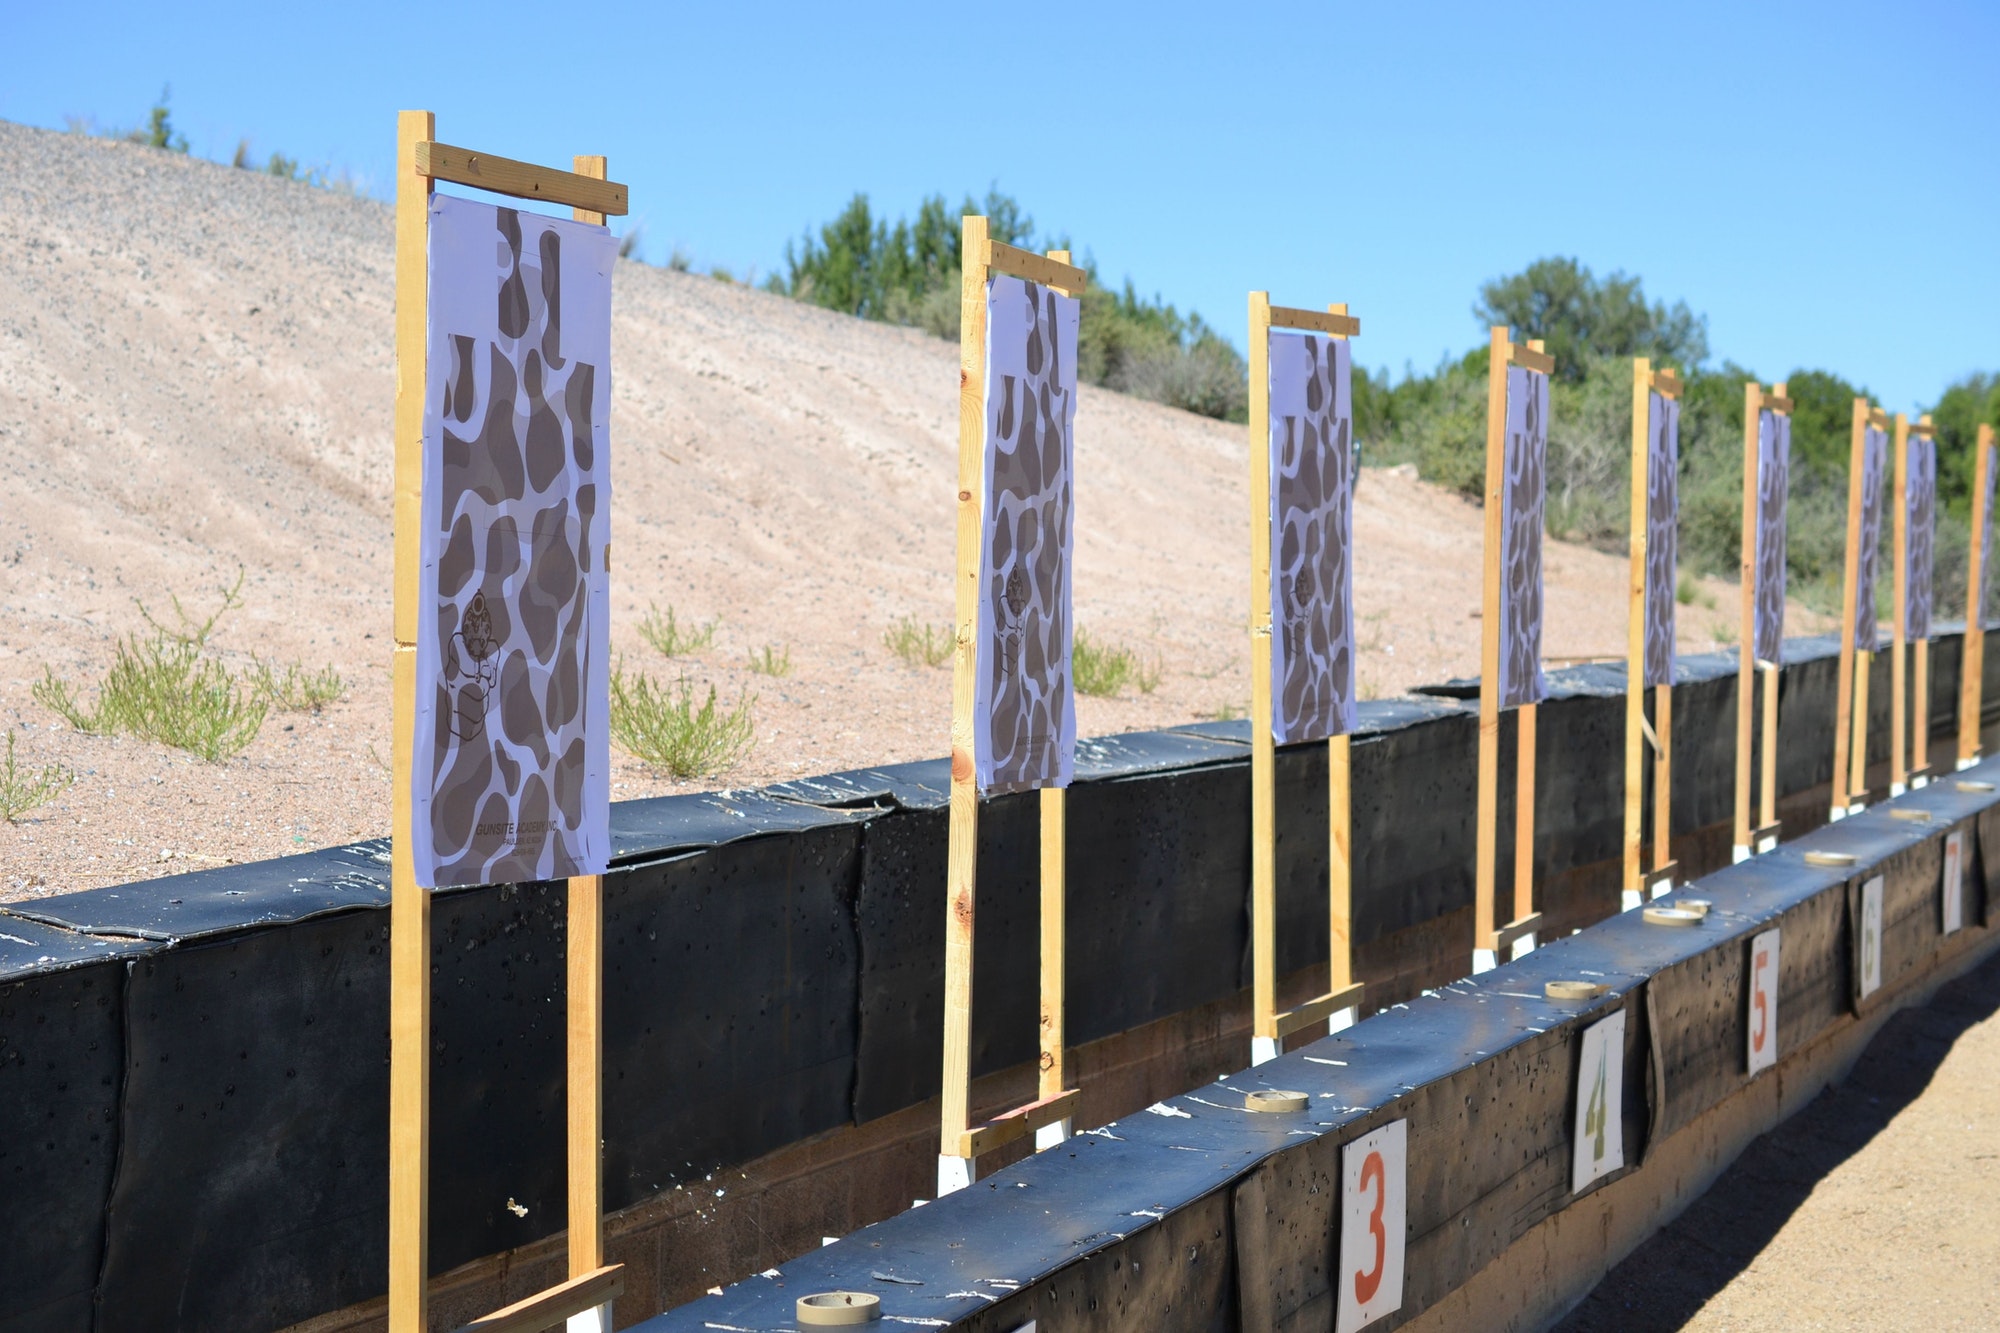 Paper targets at a gun range for target practice and firearms training